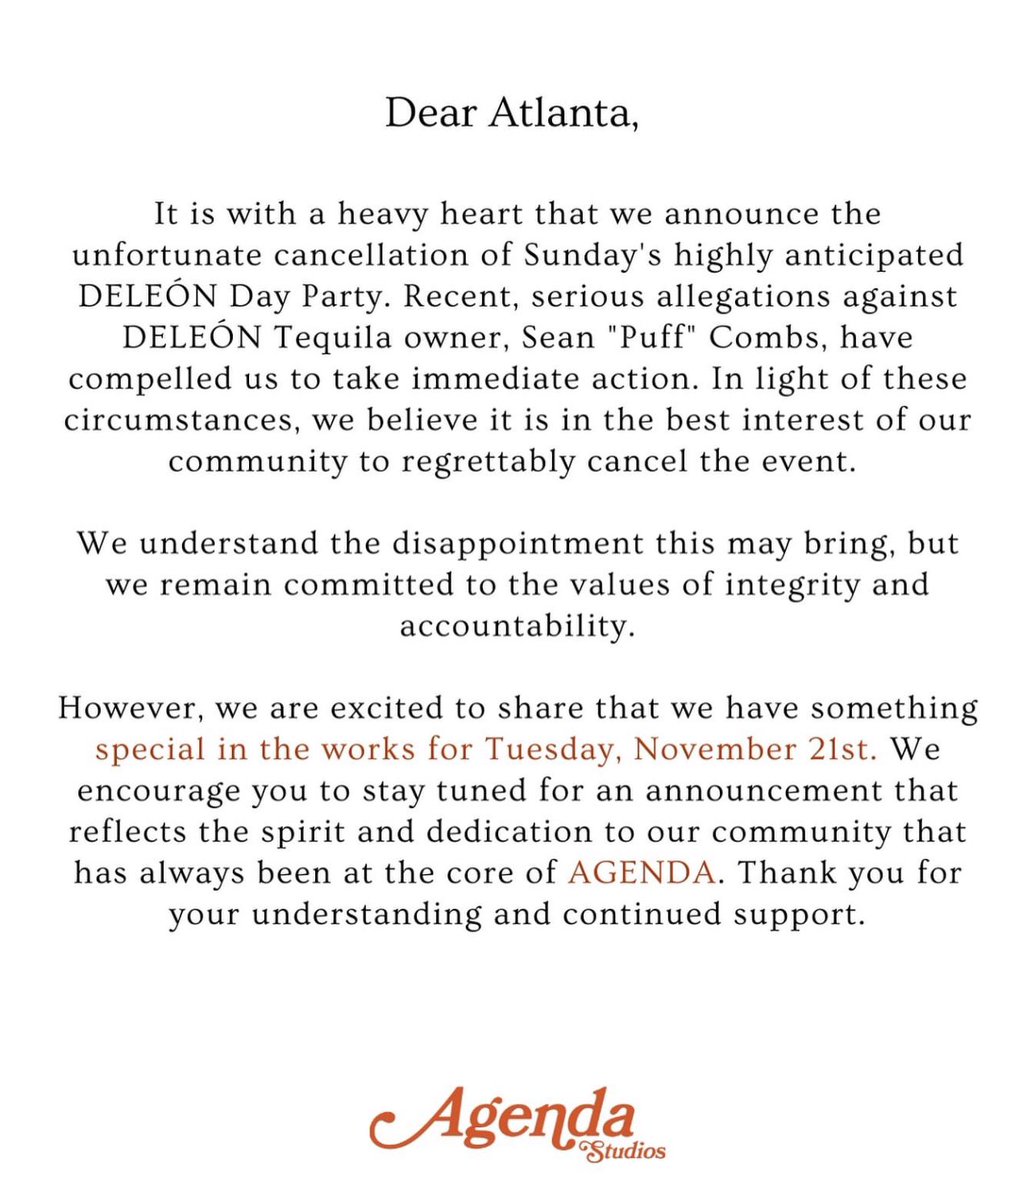 “Due to recent allegations against DELEÓN owner Sean “Puff” Combs, we regret to inform you that Sunday’s DELEÓN Day Party is canceled…” instagram.com/p/CzwUOhxg40U/…